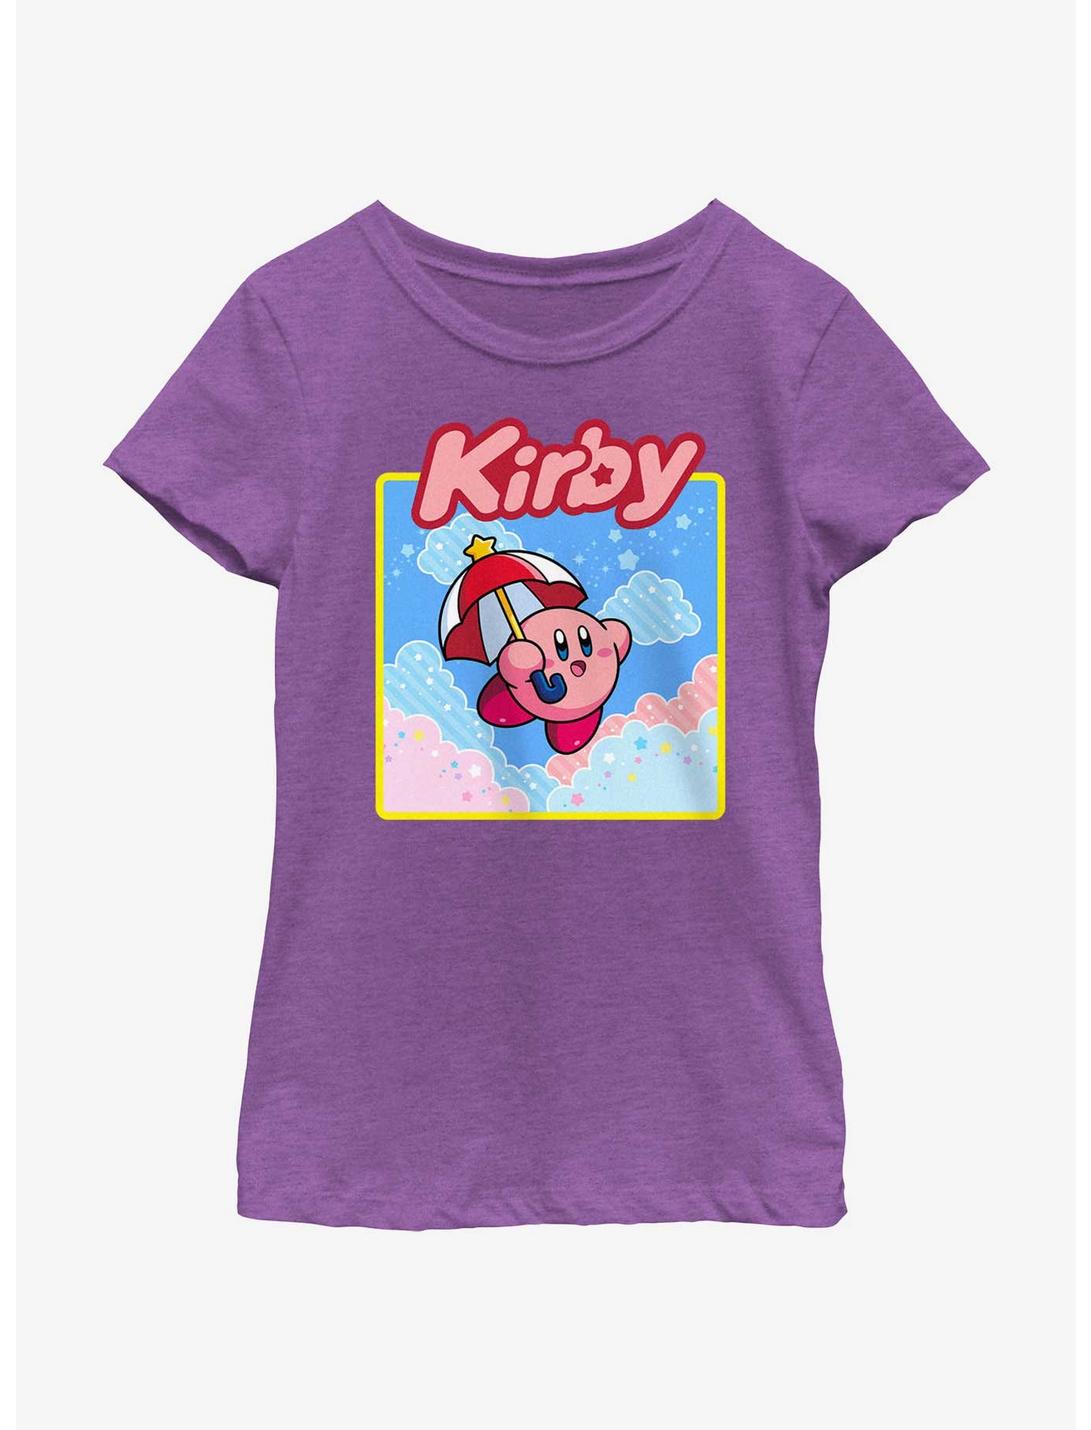 Kirby Starry Parasol Youth Girls T-Shirt, PURPLE BERRY, hi-res